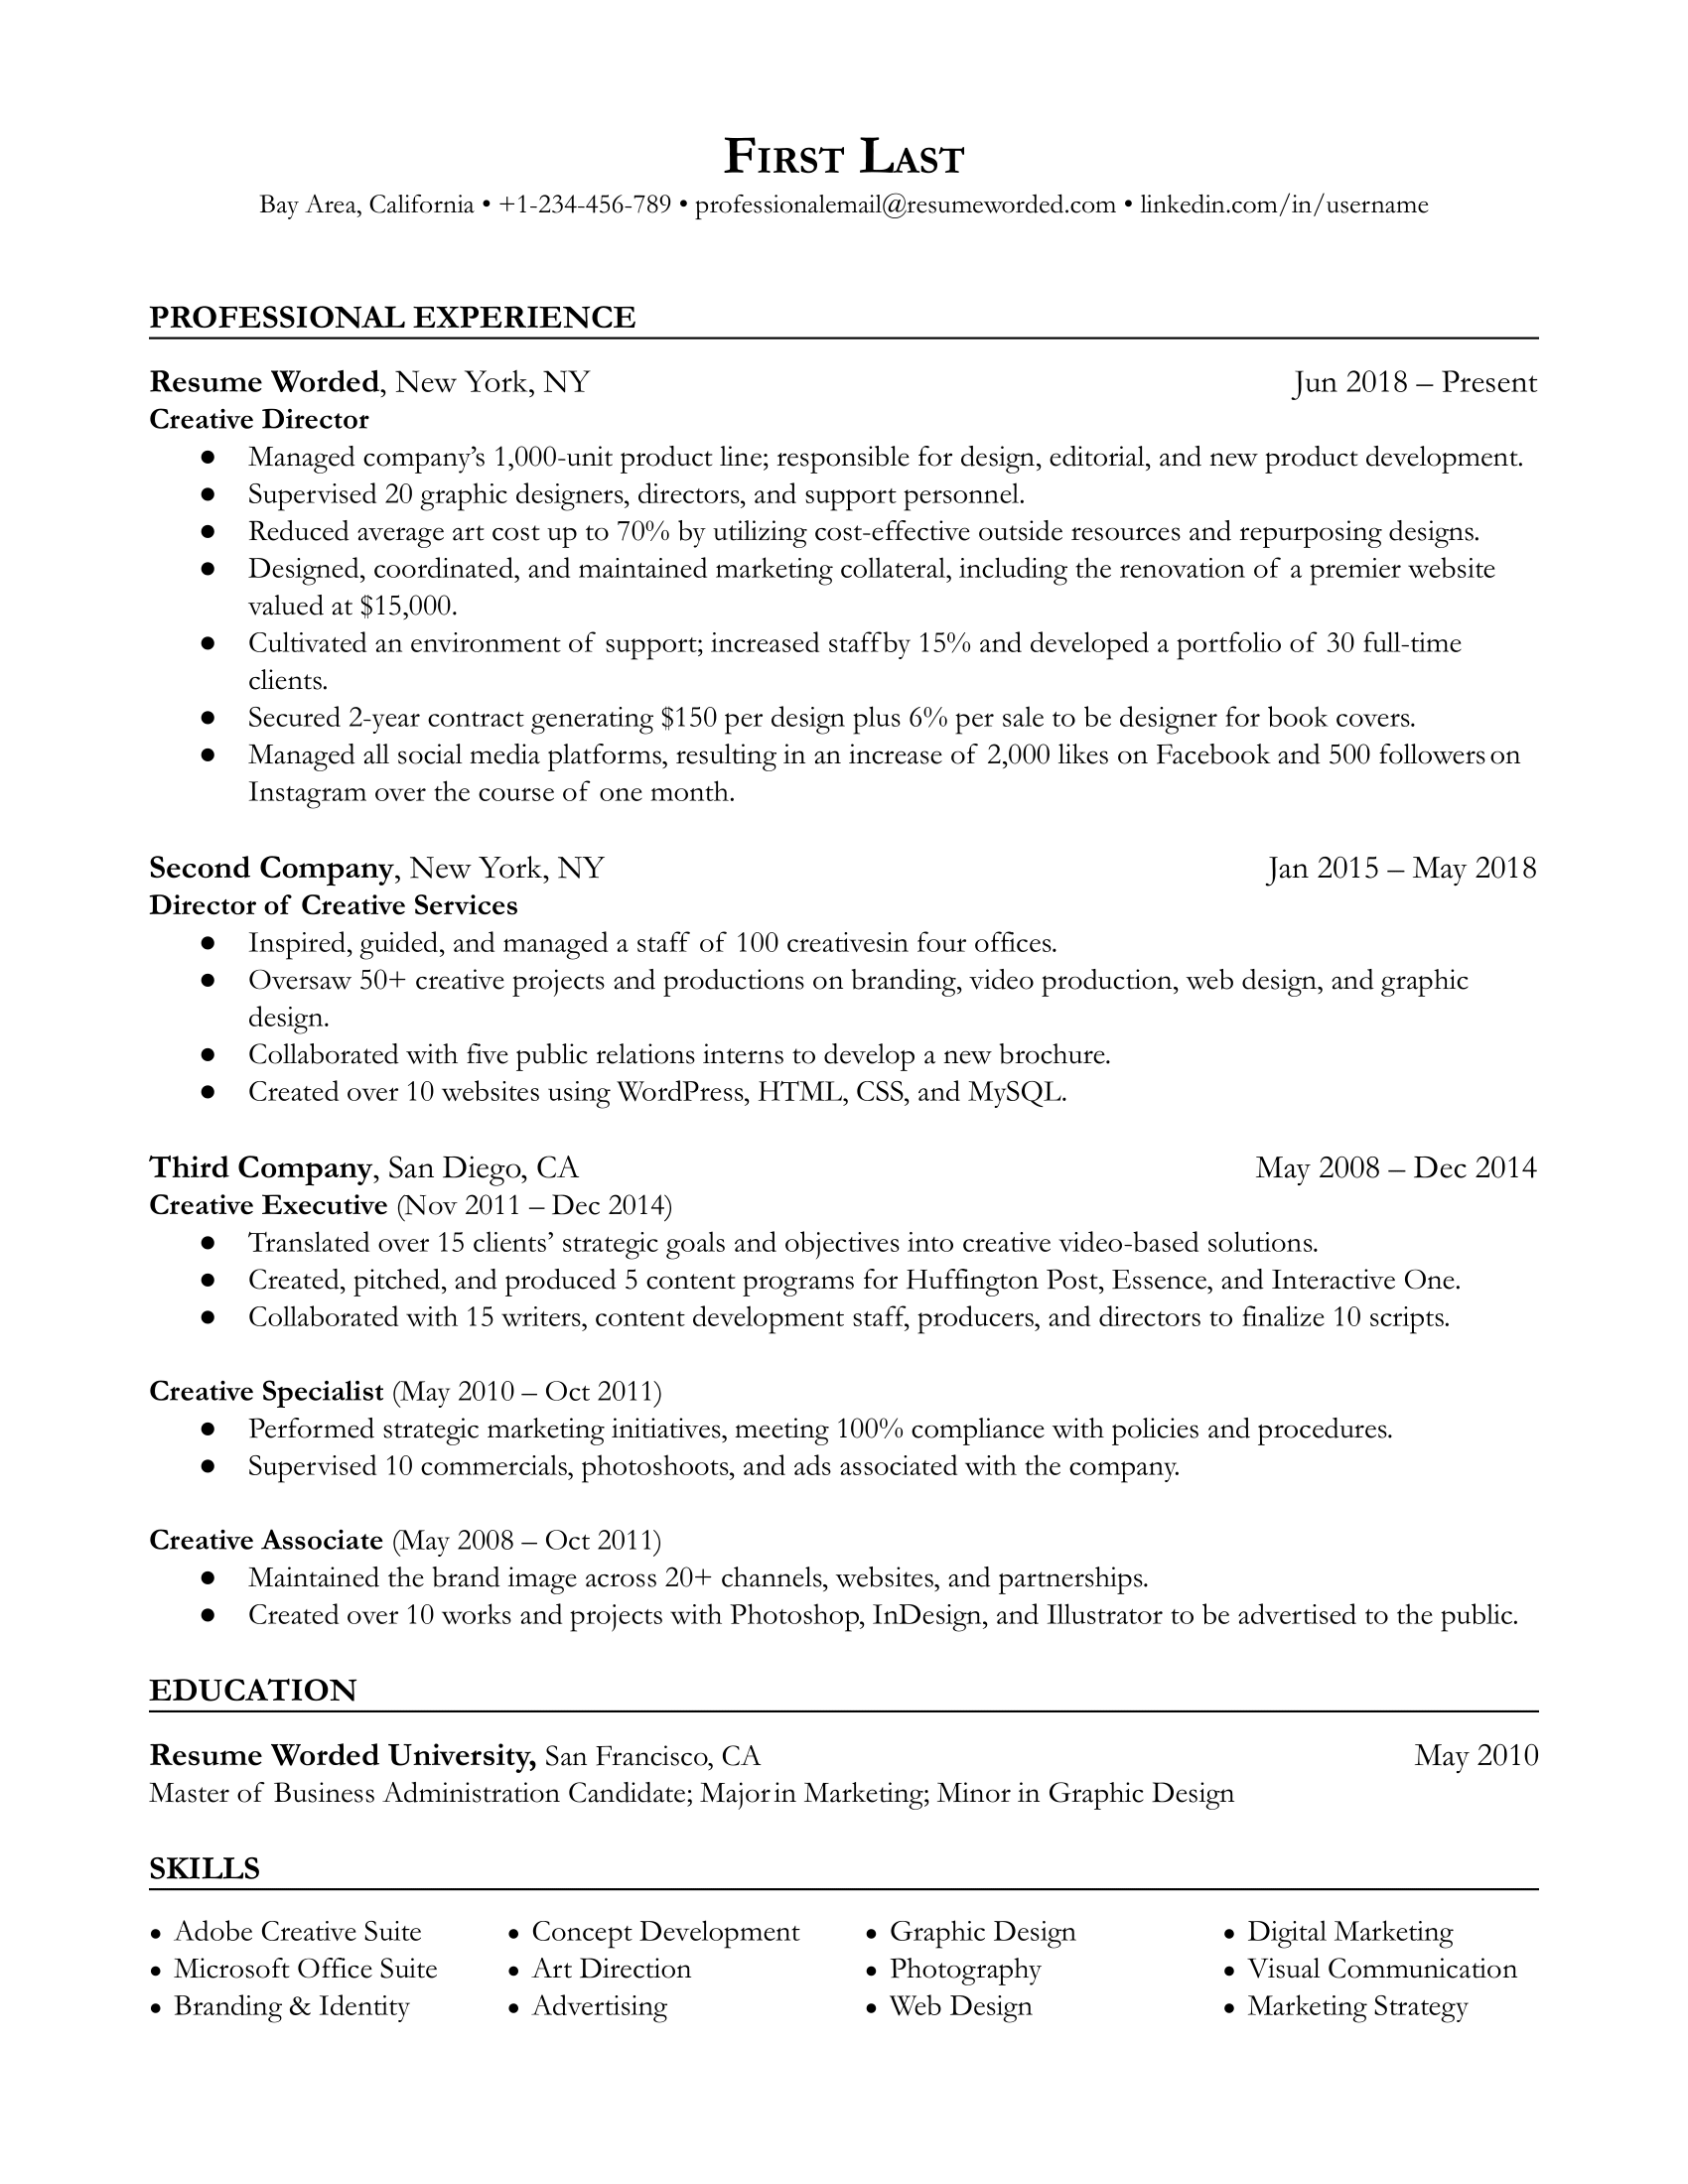 A CV of an applicant aiming for the Creative Director position showcasing their leadership experience and digital expertise.